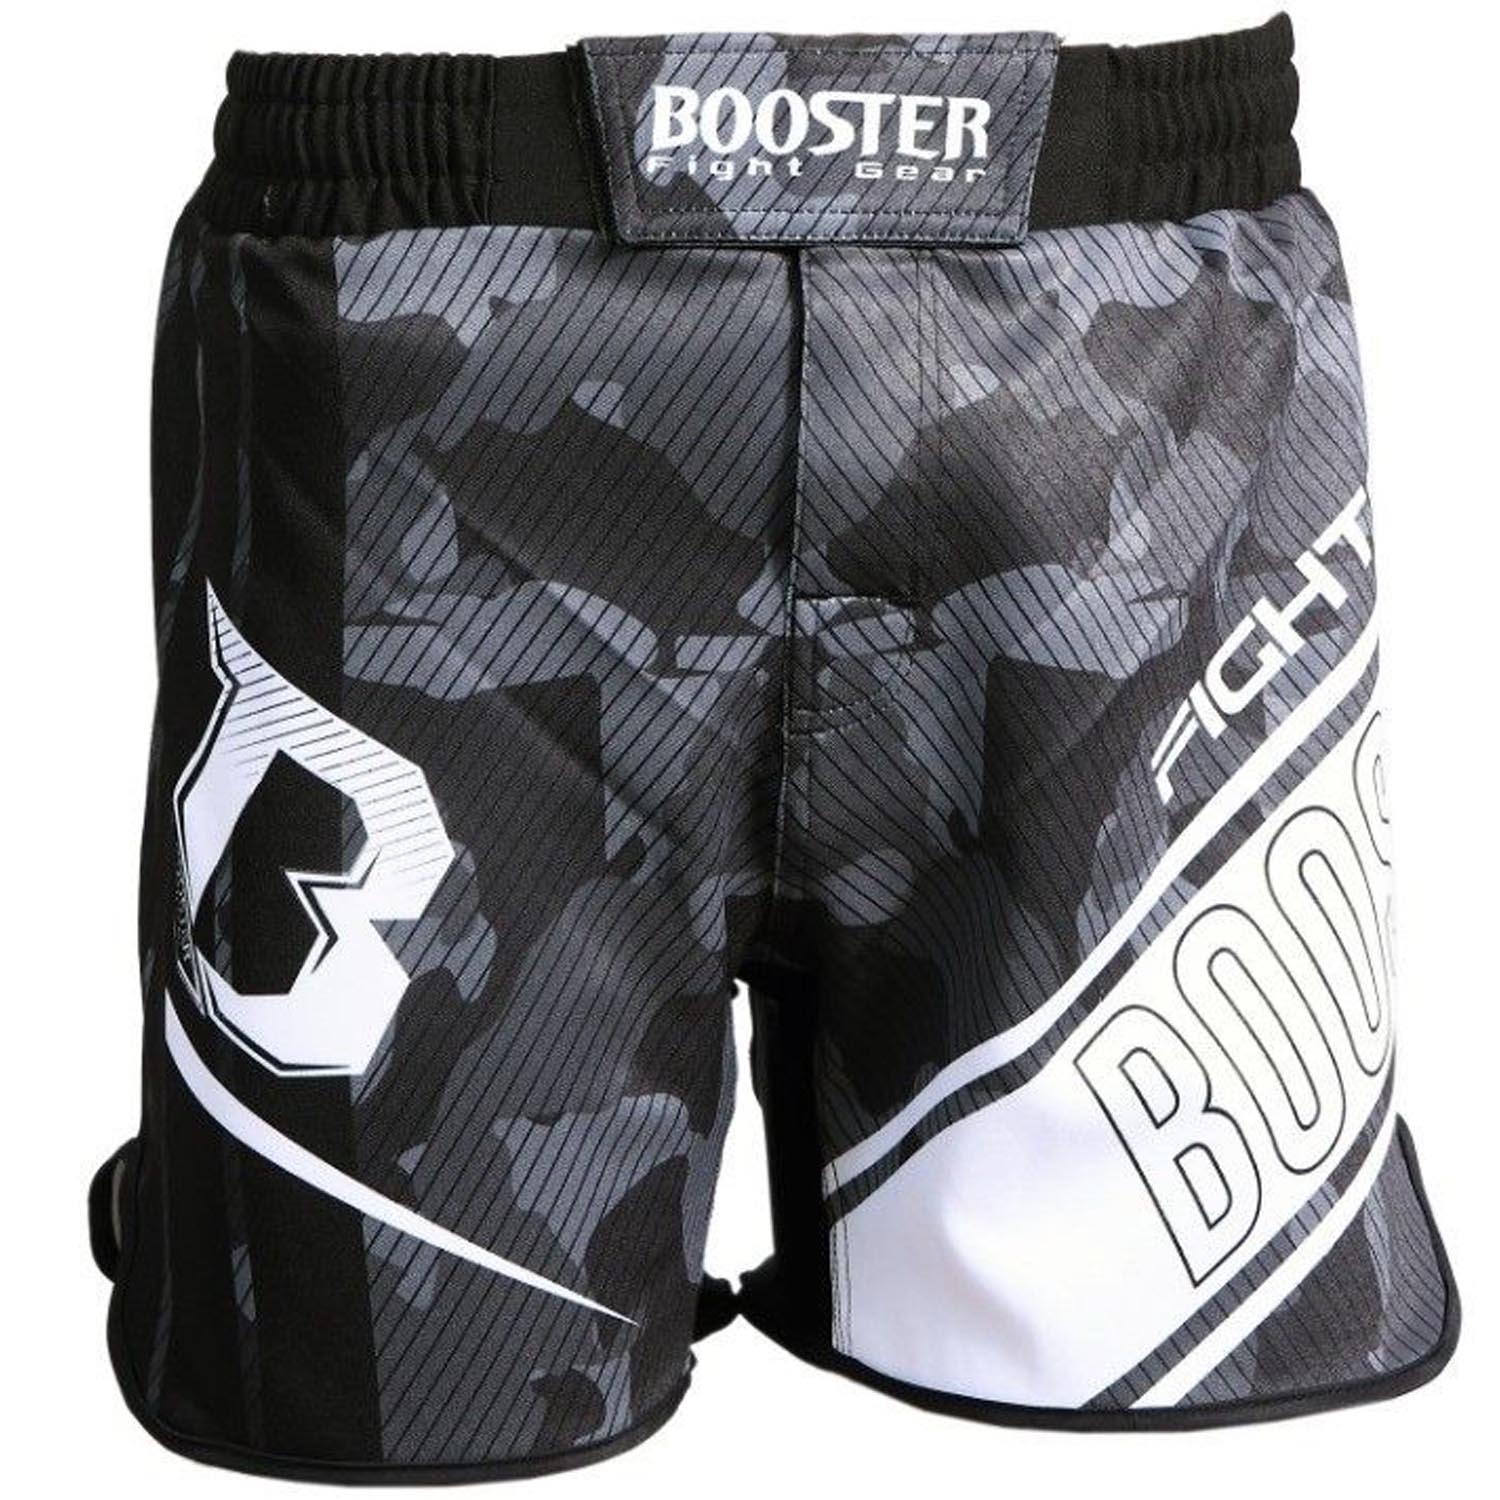 Booster MMA Fight Shorts, B Force 2, schwarz-camo, S